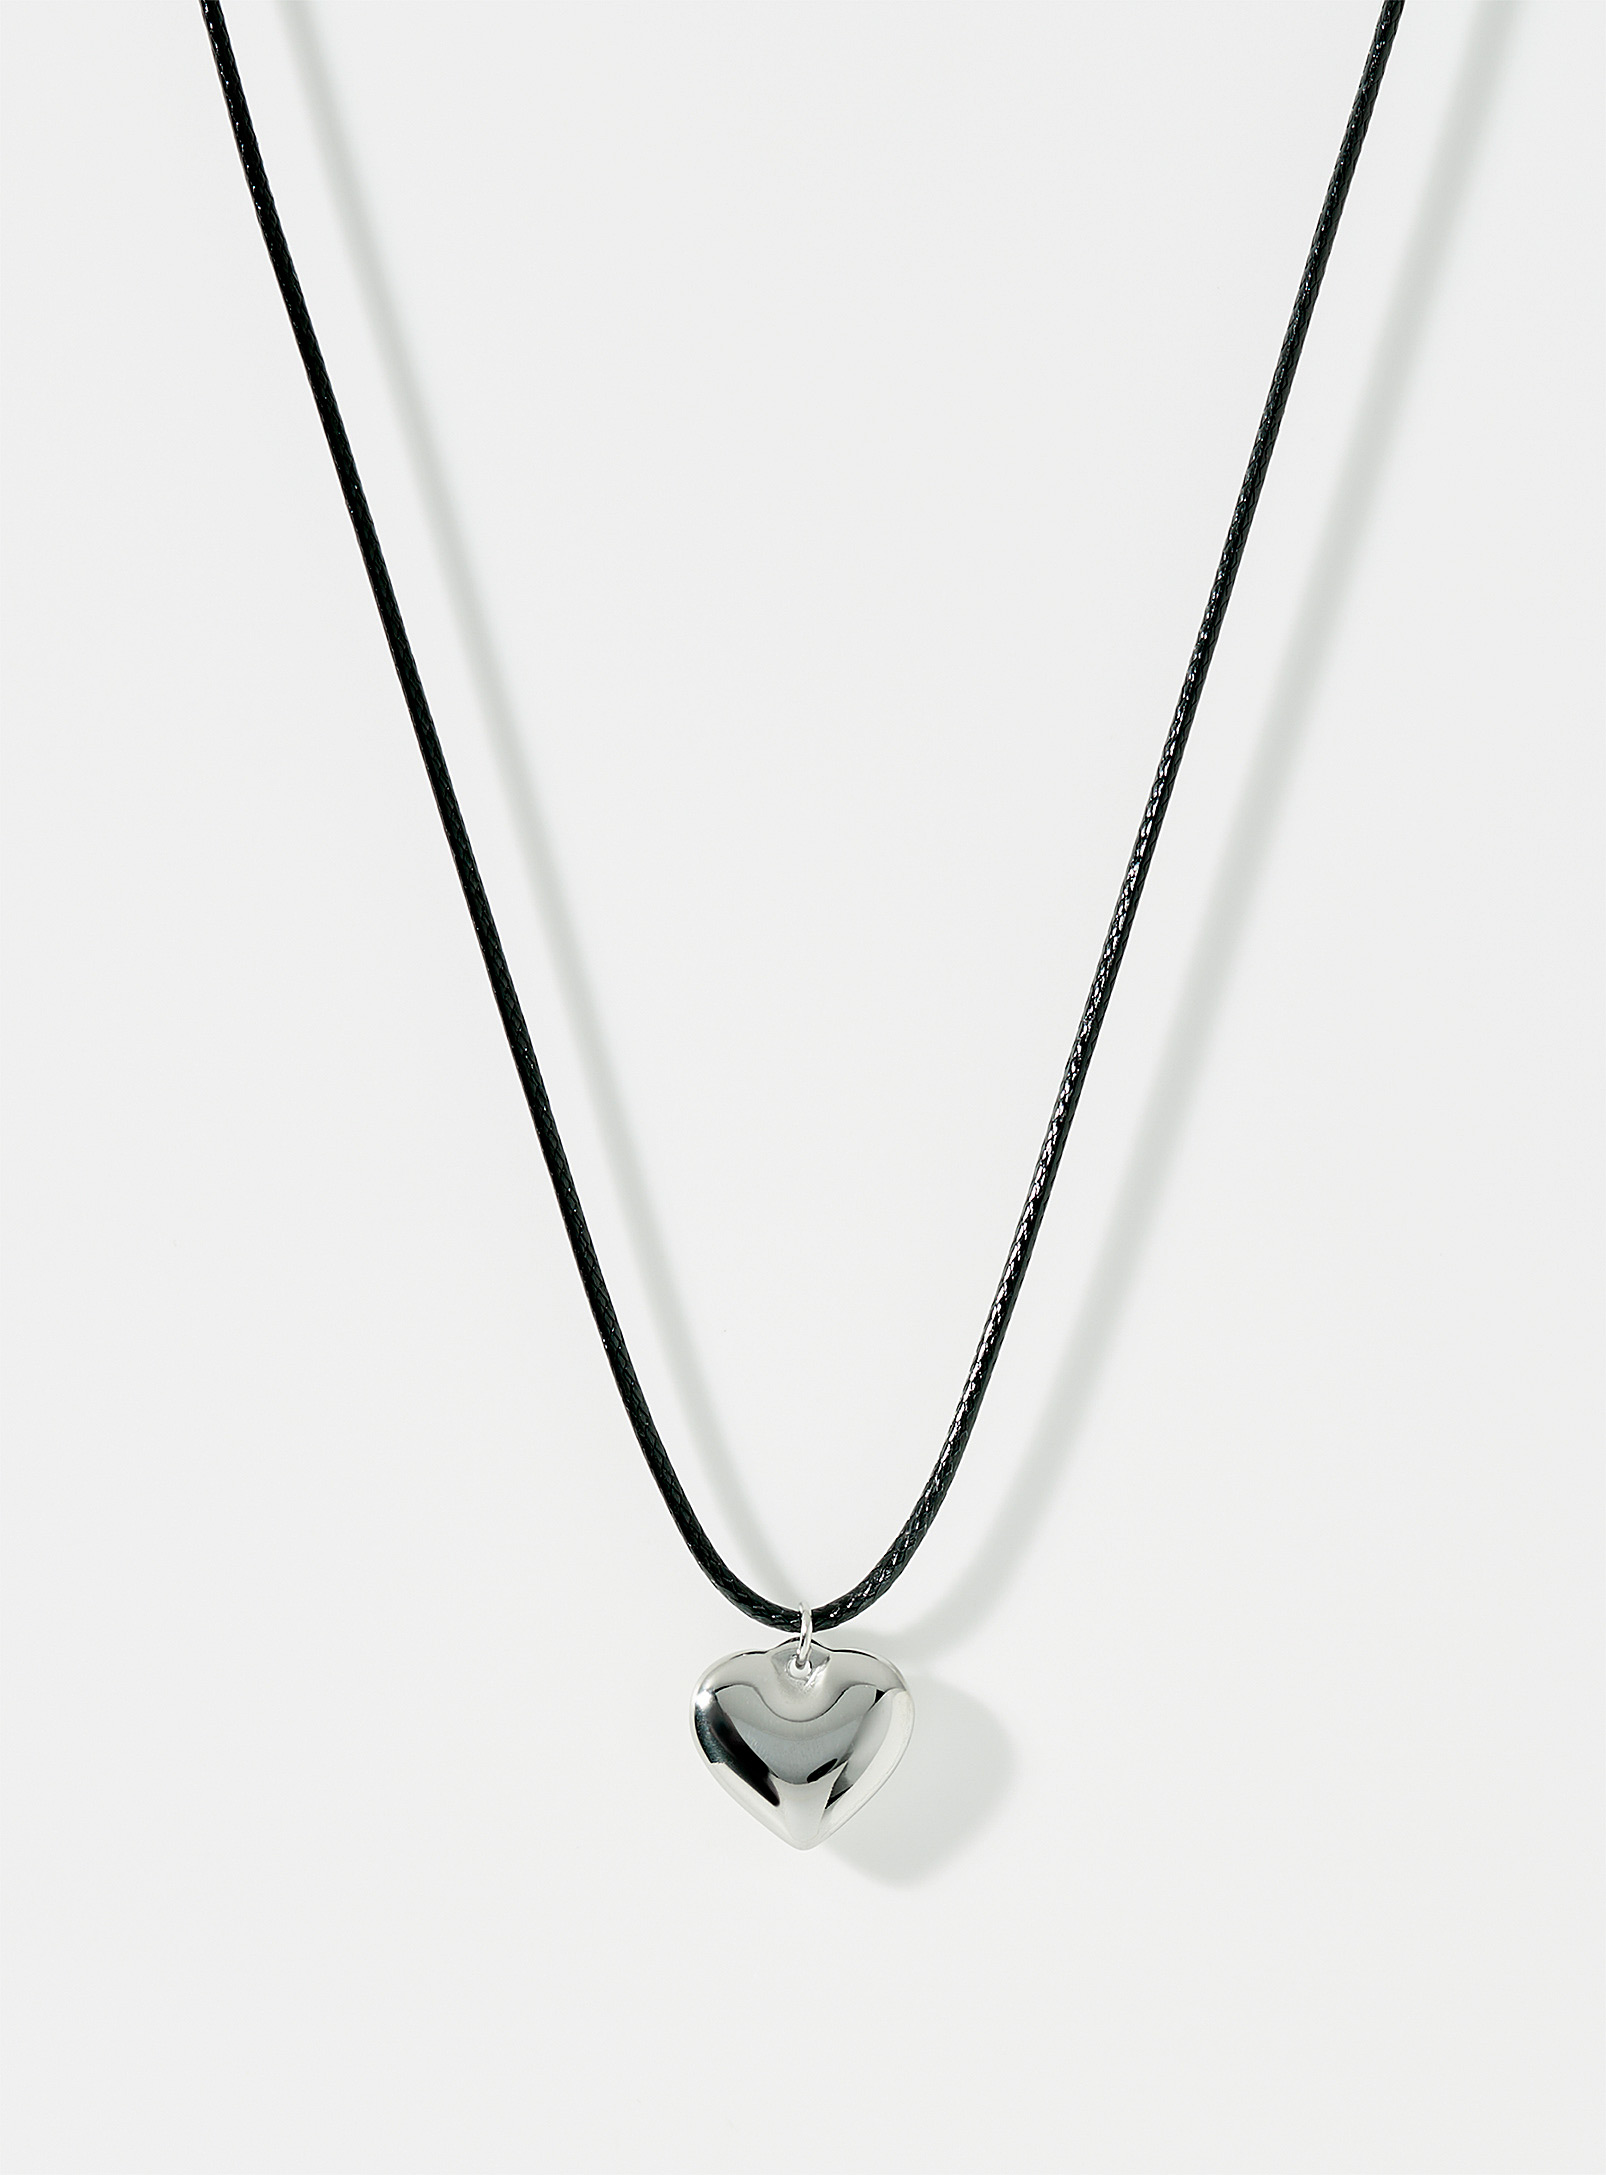 Simons - Women's Small heart cord necklace